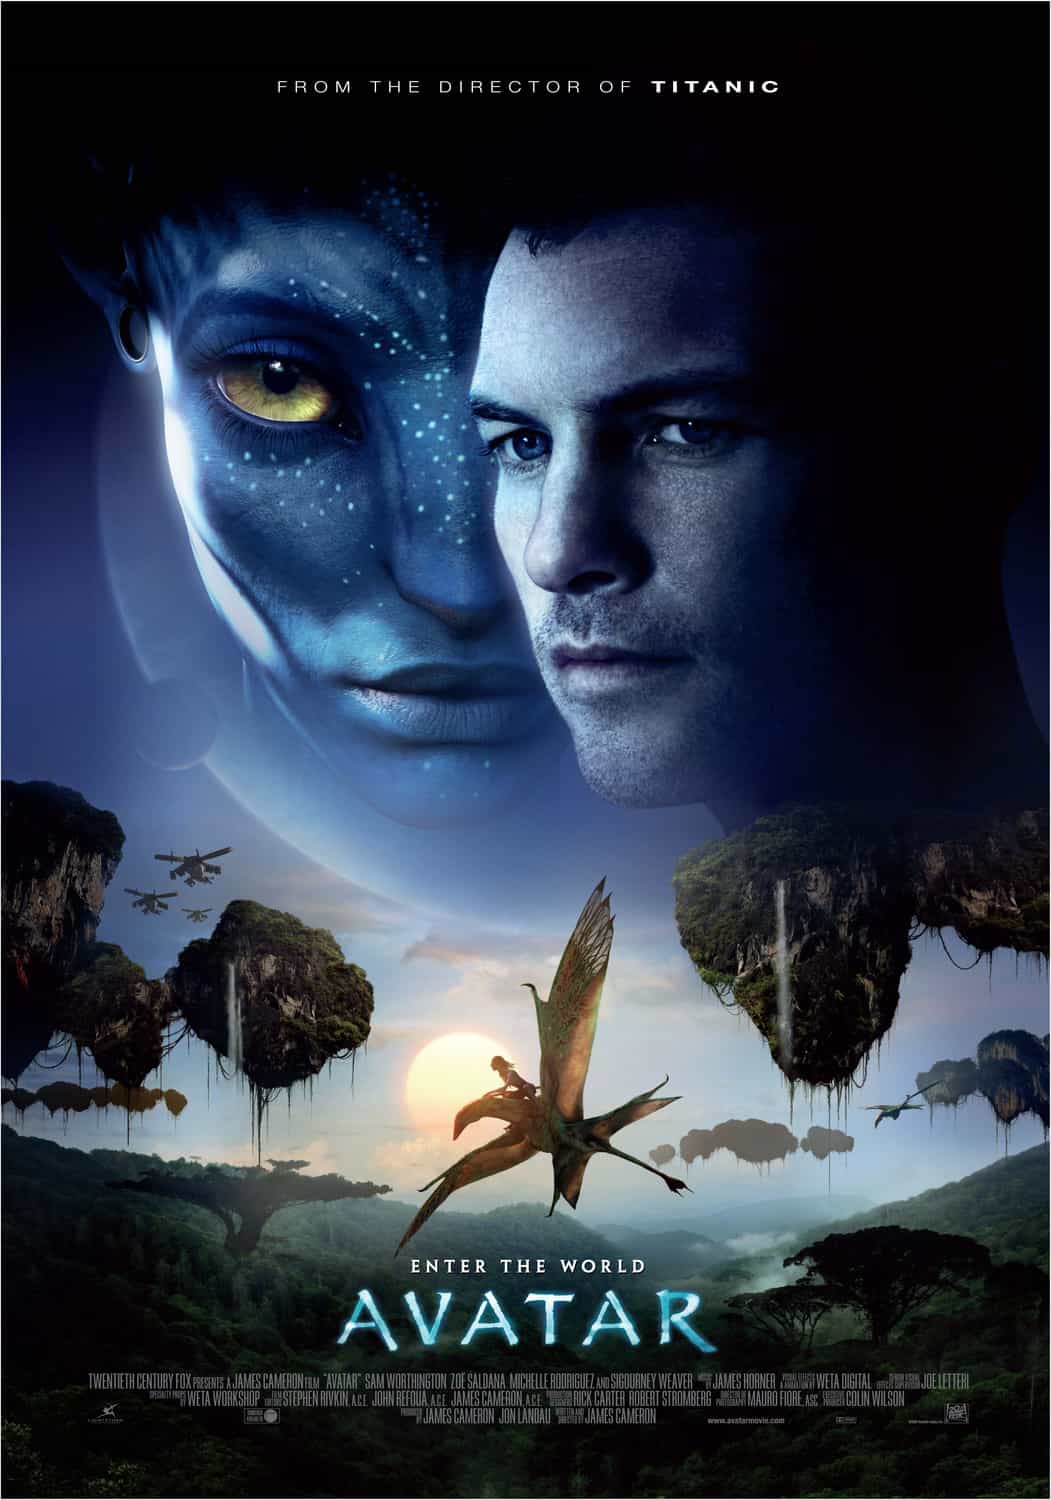 Avatar does over $1BN in record time
